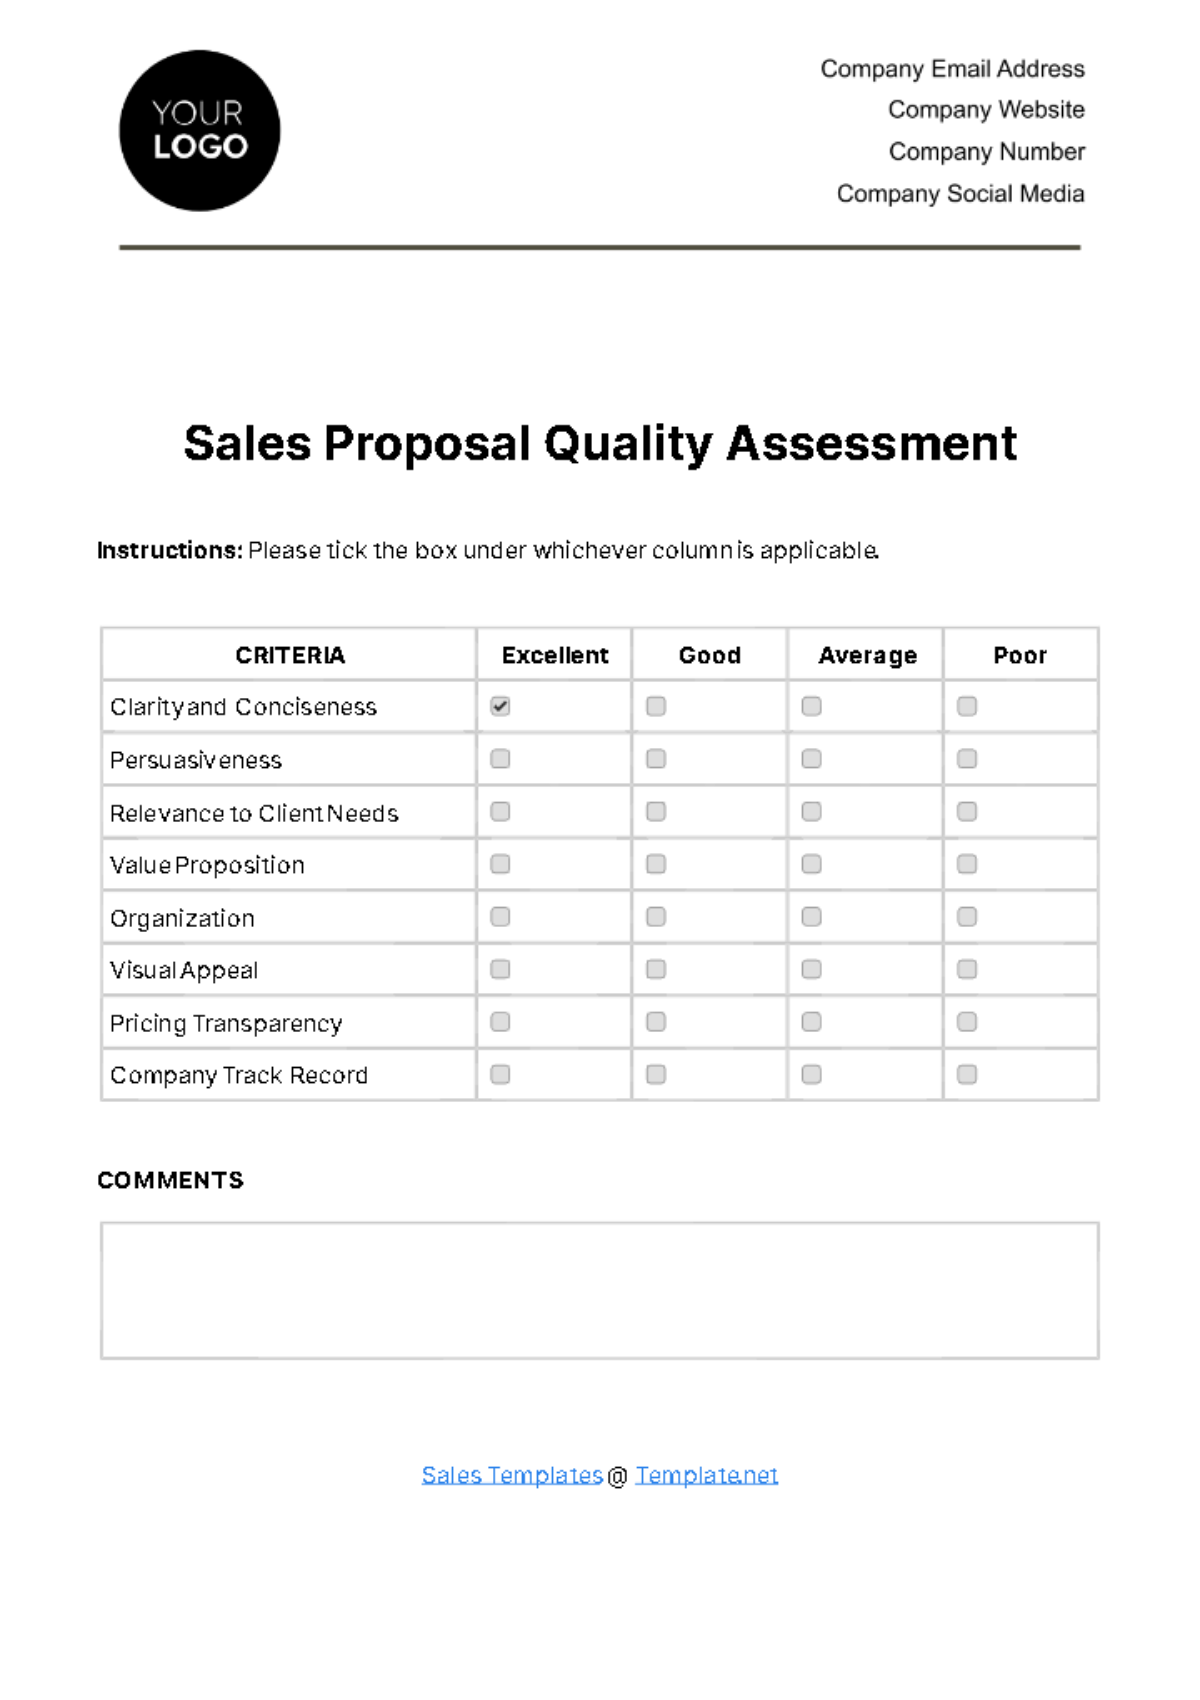 Free Sales Proposal Quality Assessment Template